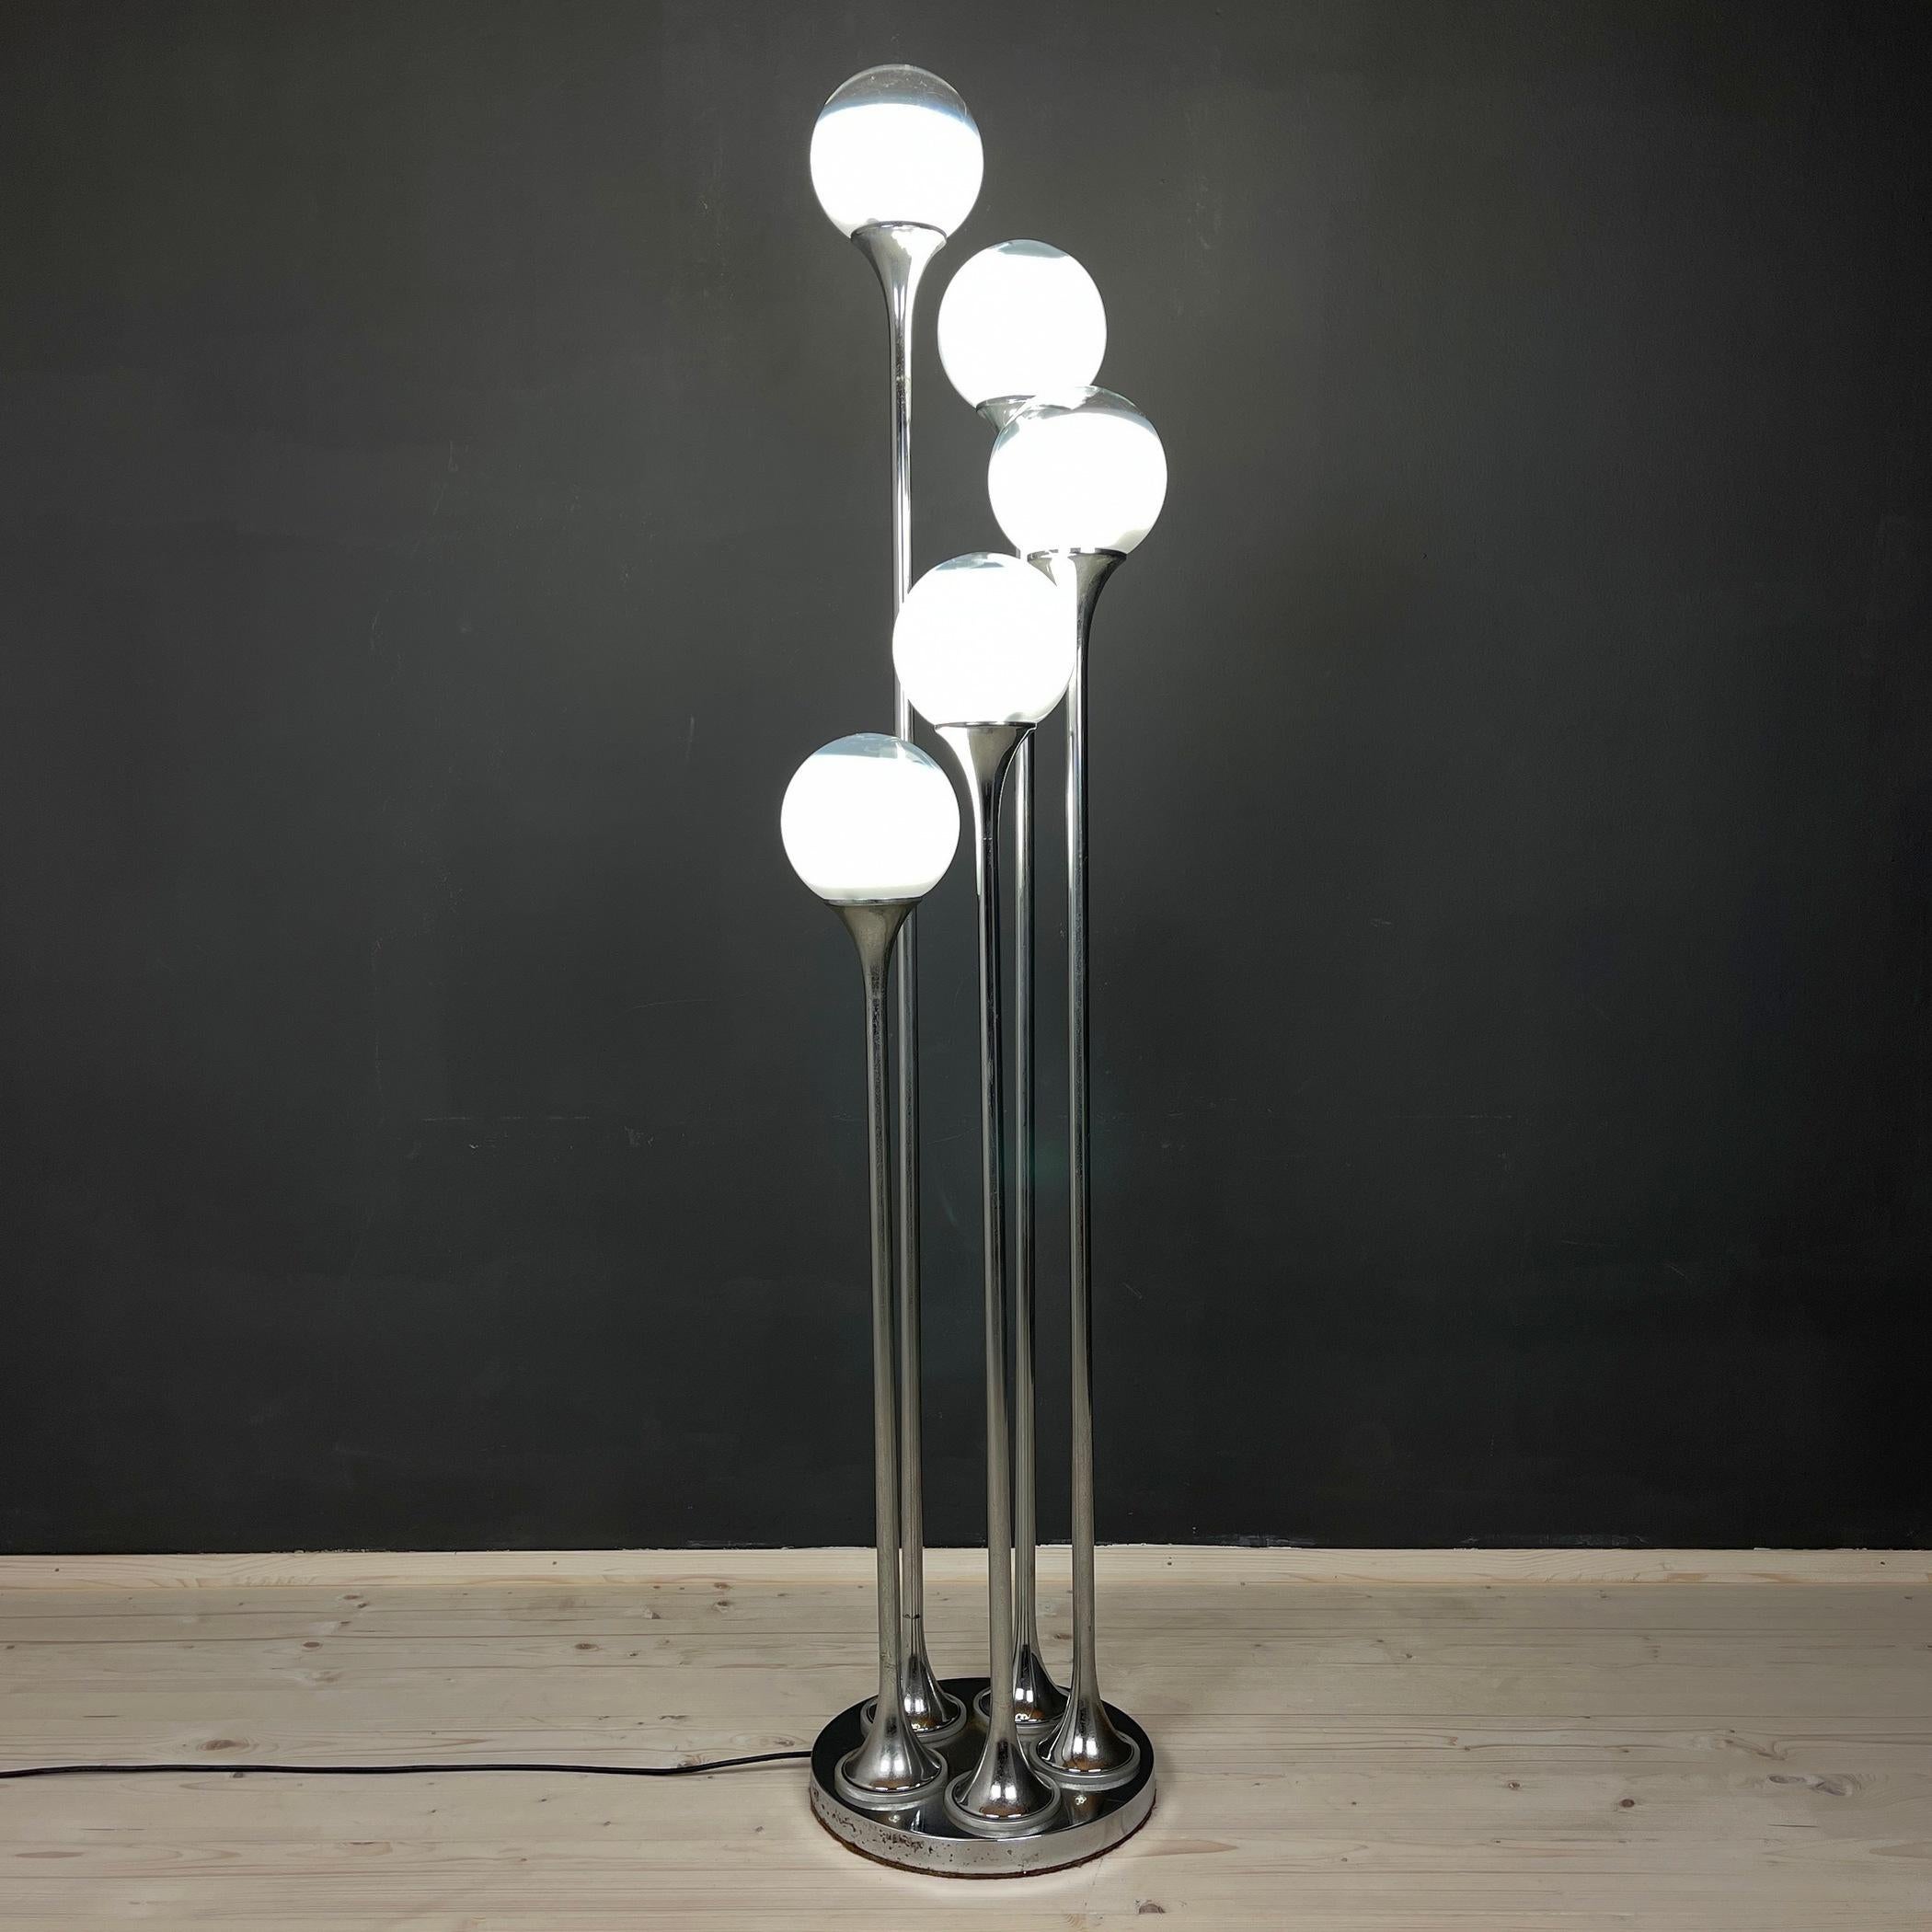 Midcentury floor lamp by Targetti Sankey made in Italy in the 1960s The glass components are constructed of blown Murano glass. The lamp has a unique and uncommon shape. This brilliantly captures the mid-century aesthetic and the spirit of the space